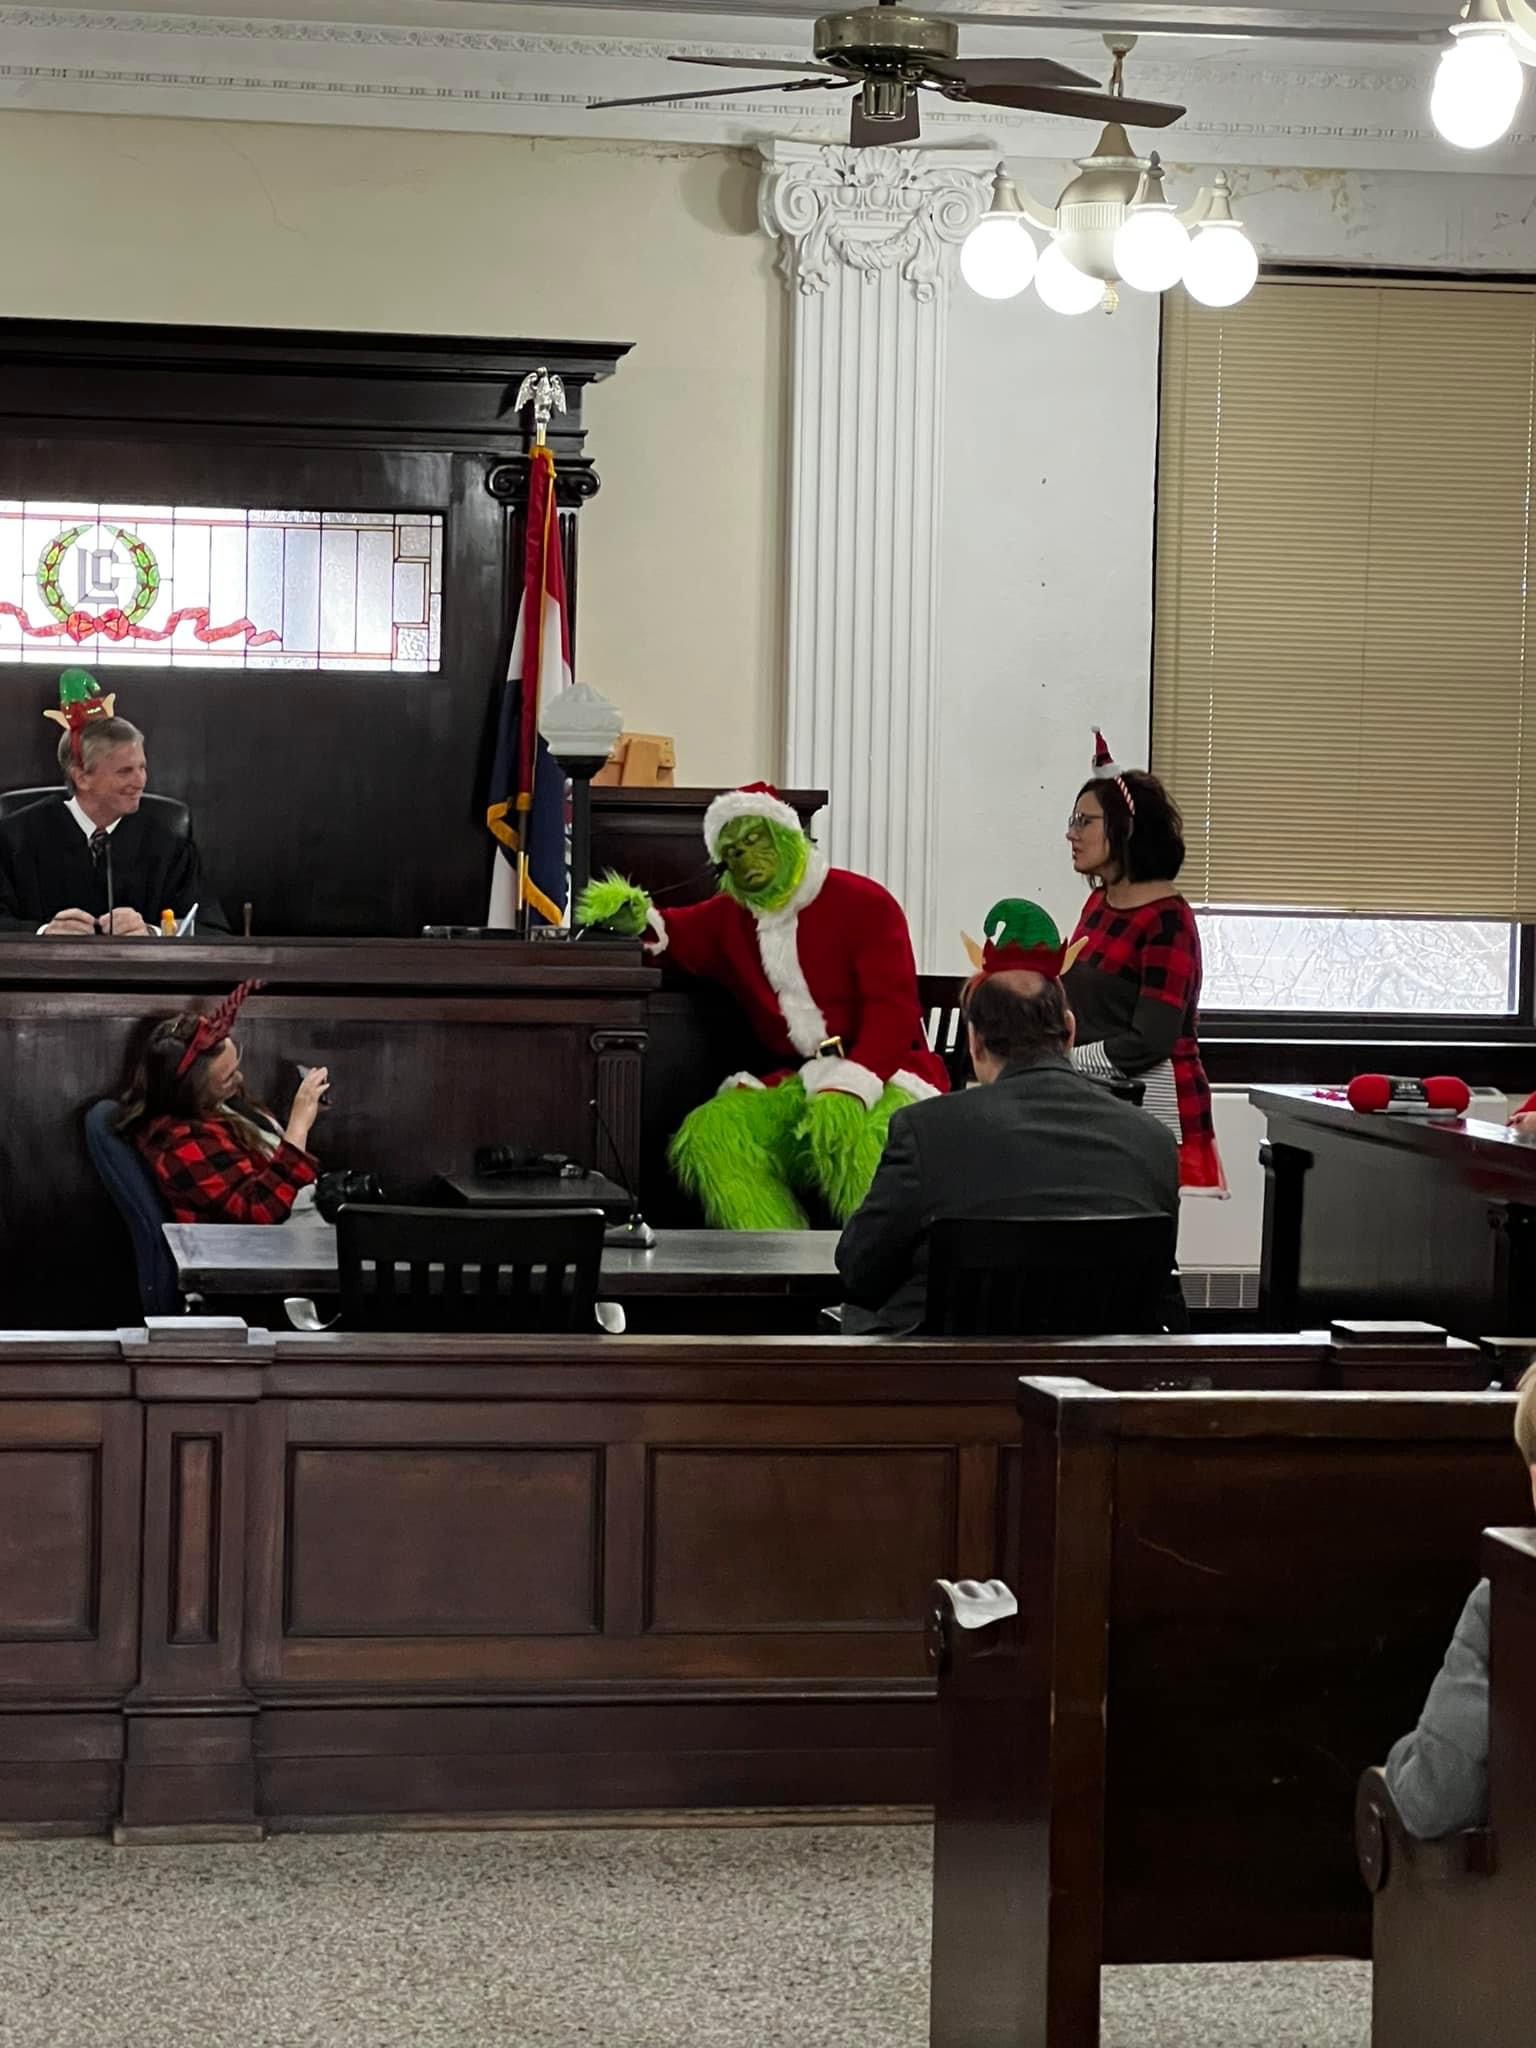 The Grinch testifying at the witness stand